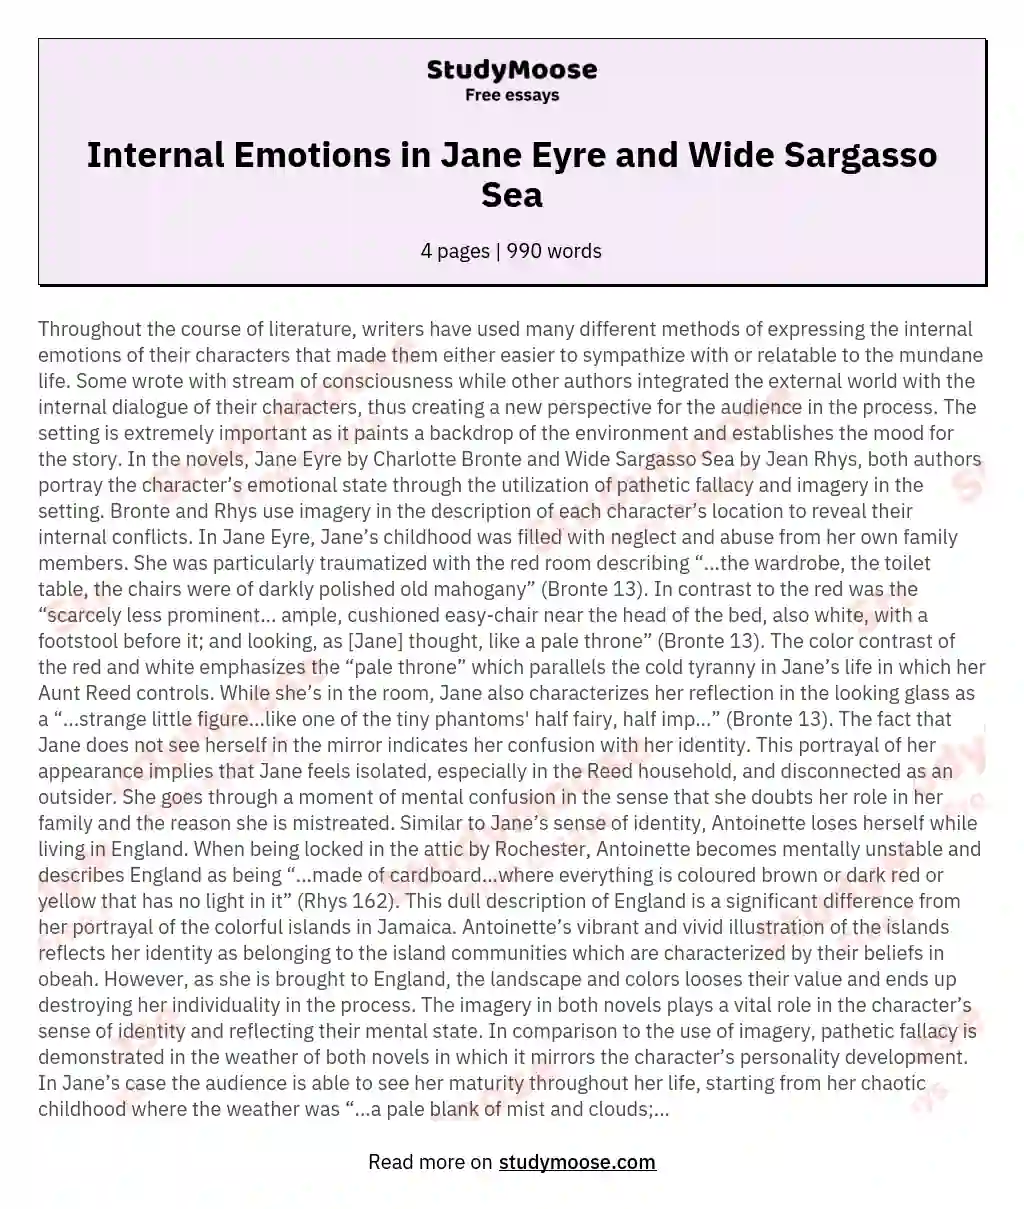 Internal Emotions in Jane Eyre and Wide Sargasso Sea